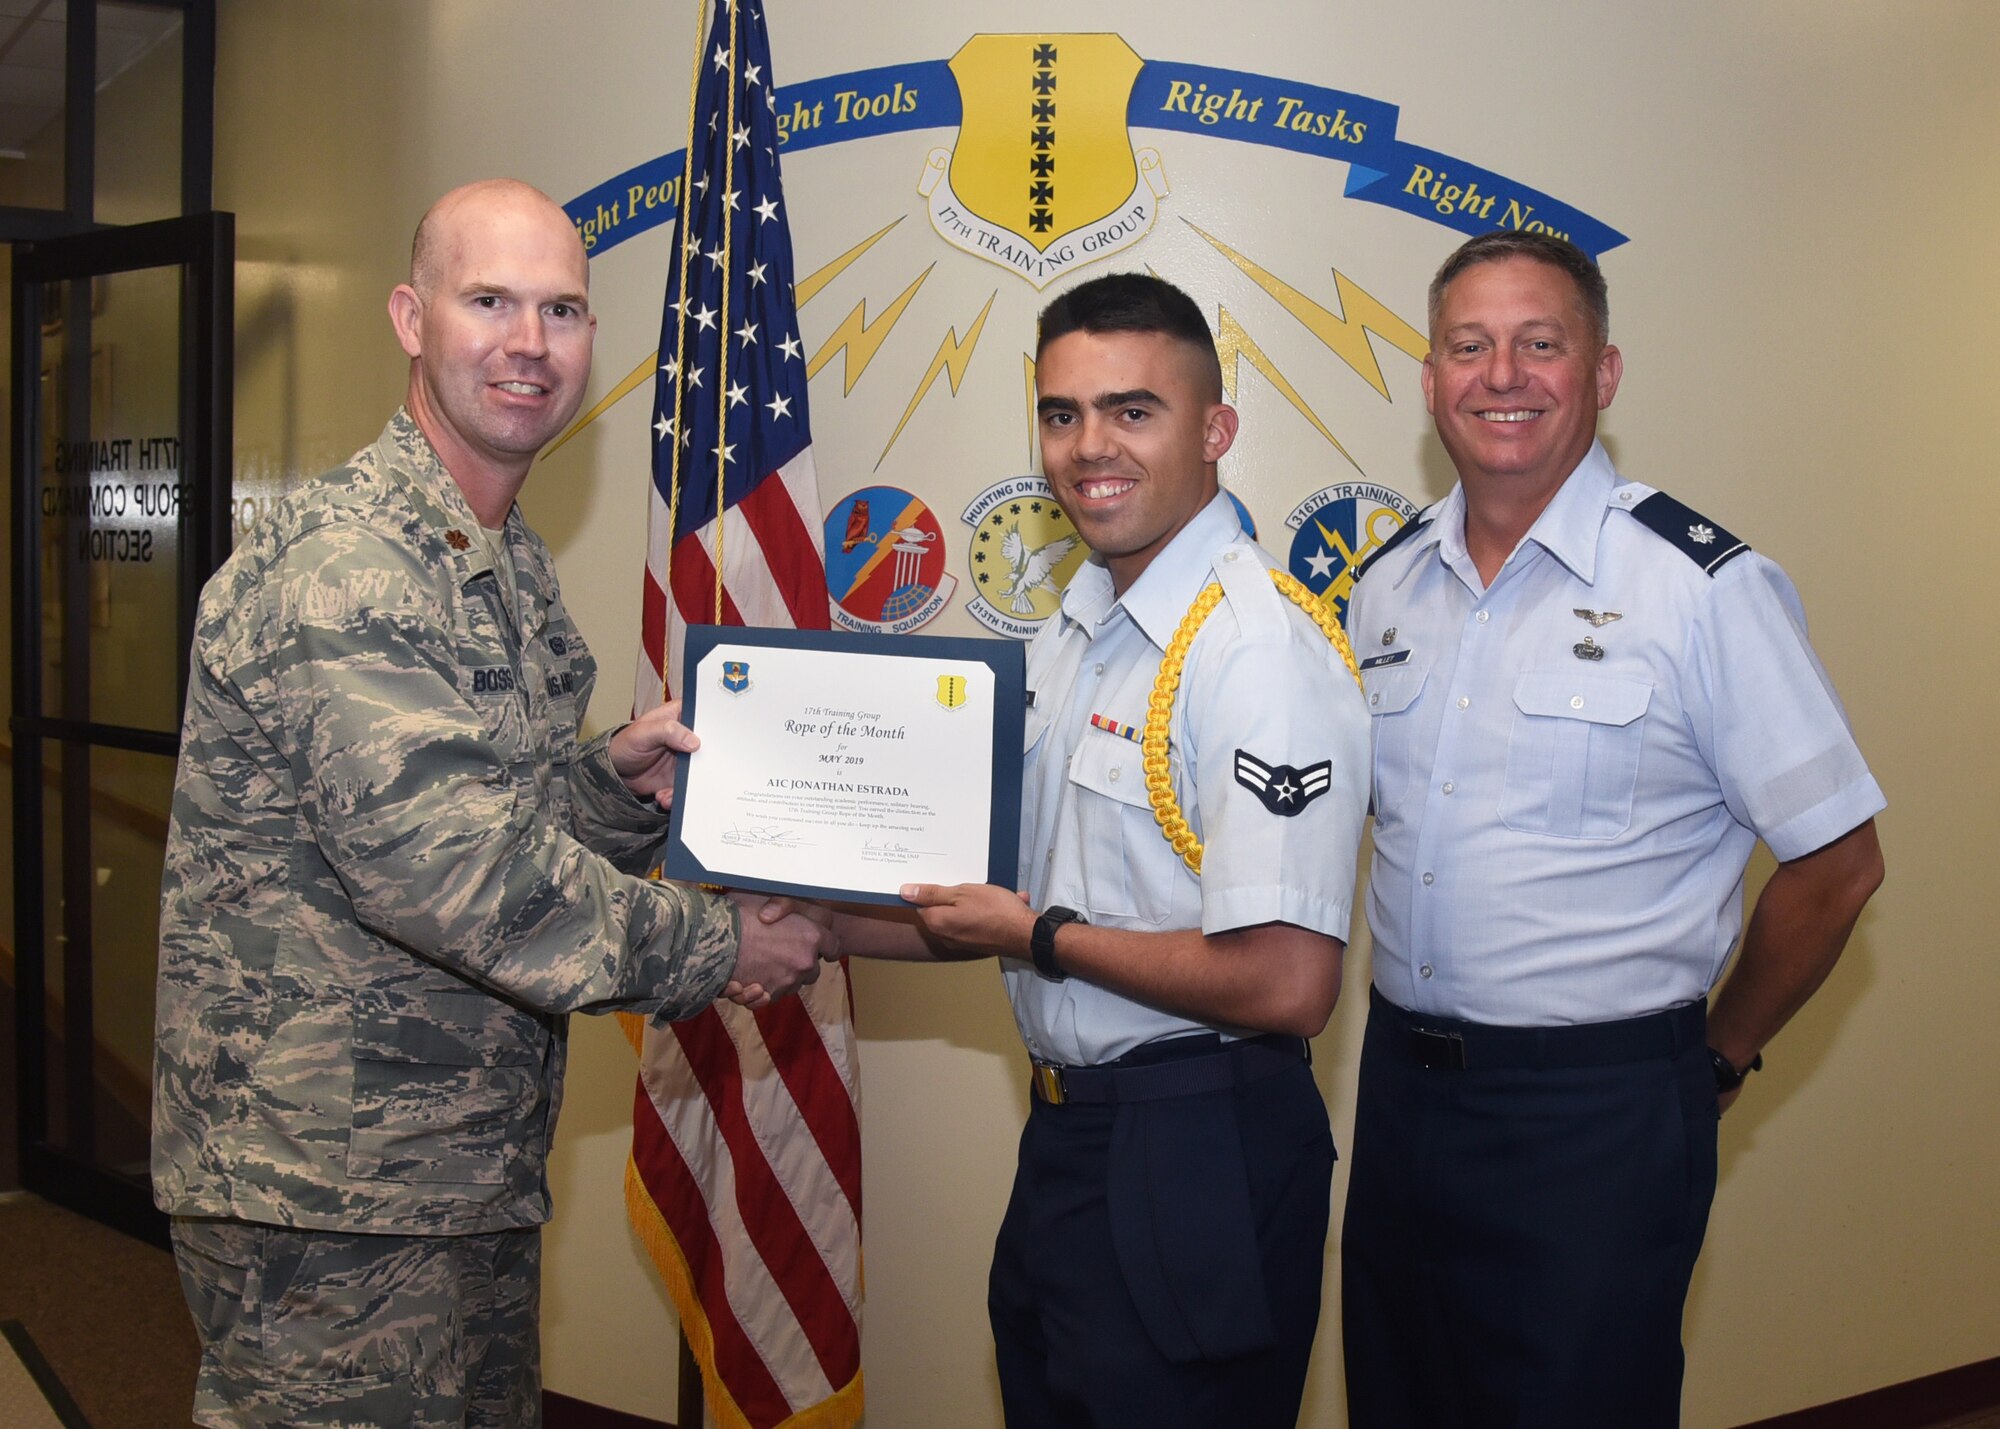 U.S. Air Force Maj. Kevin Boss, 17th Training Group director of operations, presents the Rope of the Month award to Airman 1st Class Jonathon Estrada, 315th Training Squadron student at the Brandenburg Hall on Goodfellow Air Force Base, Texas, June 7, 2019. Military Training Leaders present ropes to Airmen who display exceptional leadership qualities to lead their peers. (U.S. Air Force photo by Airman 1st Class Abbey Rieves/Released)